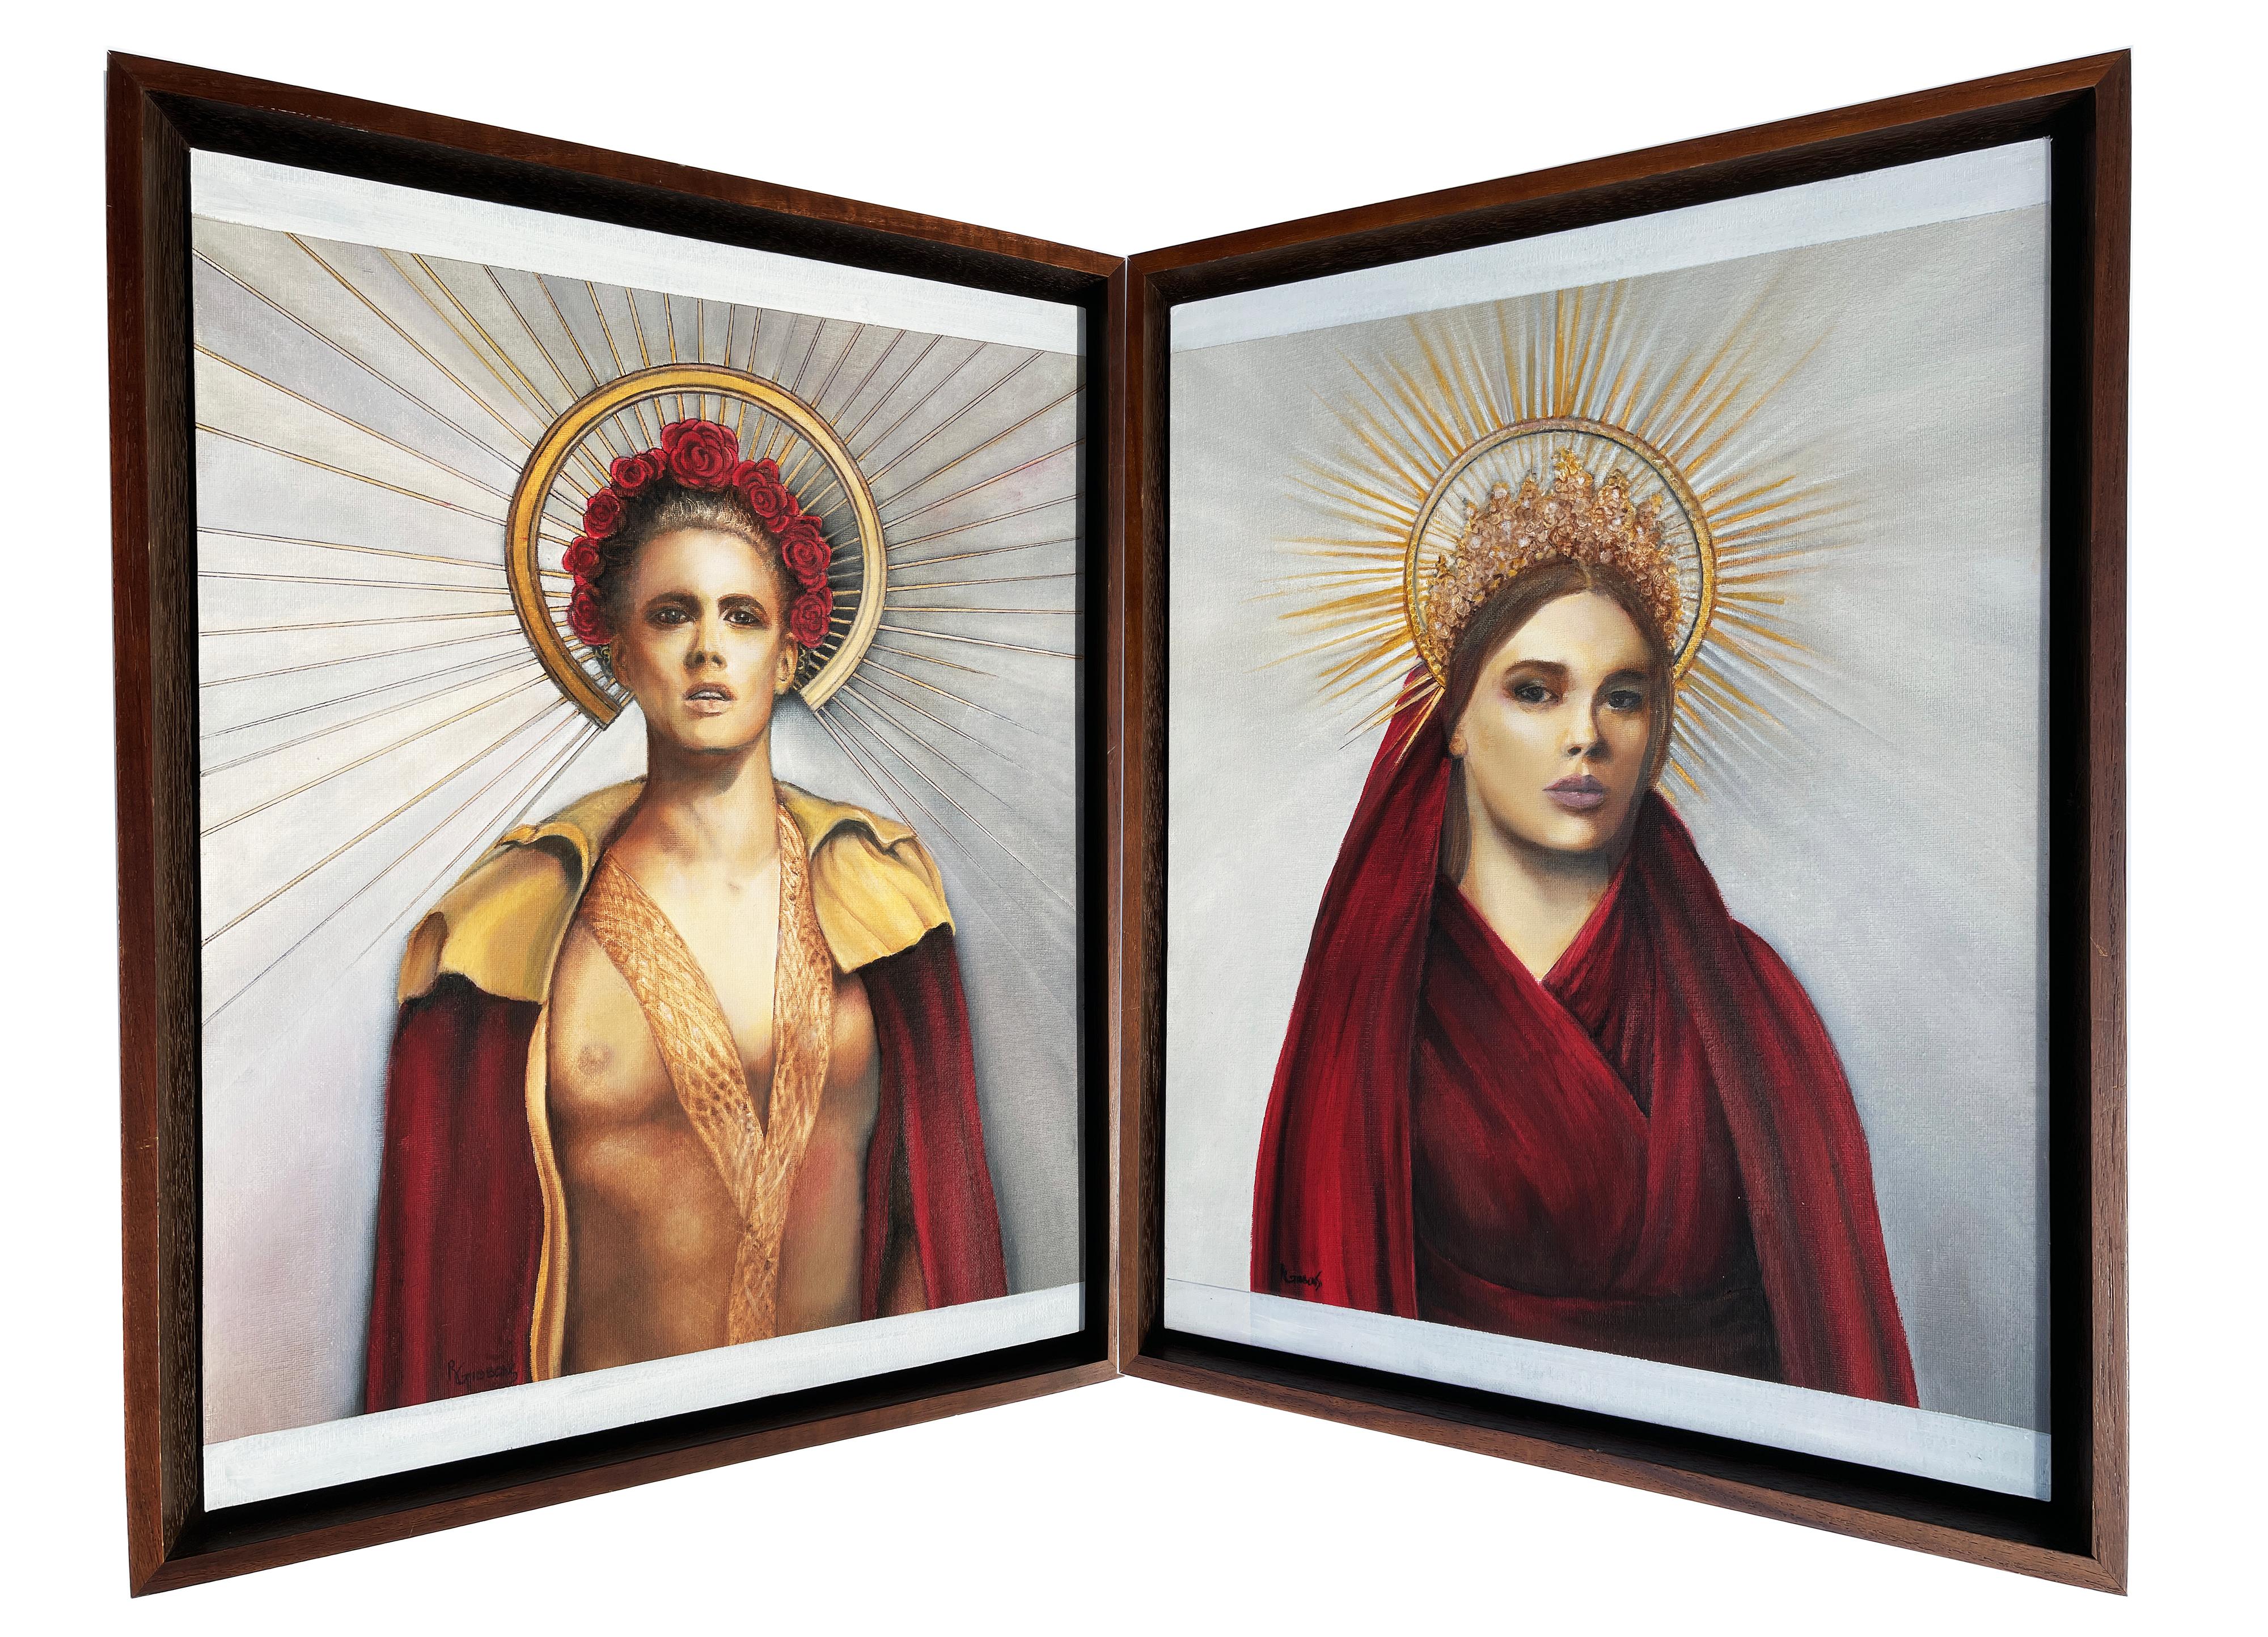 Jason and Medea - Greek Mythological Couple Inspired Diptych of Love and Tragedy